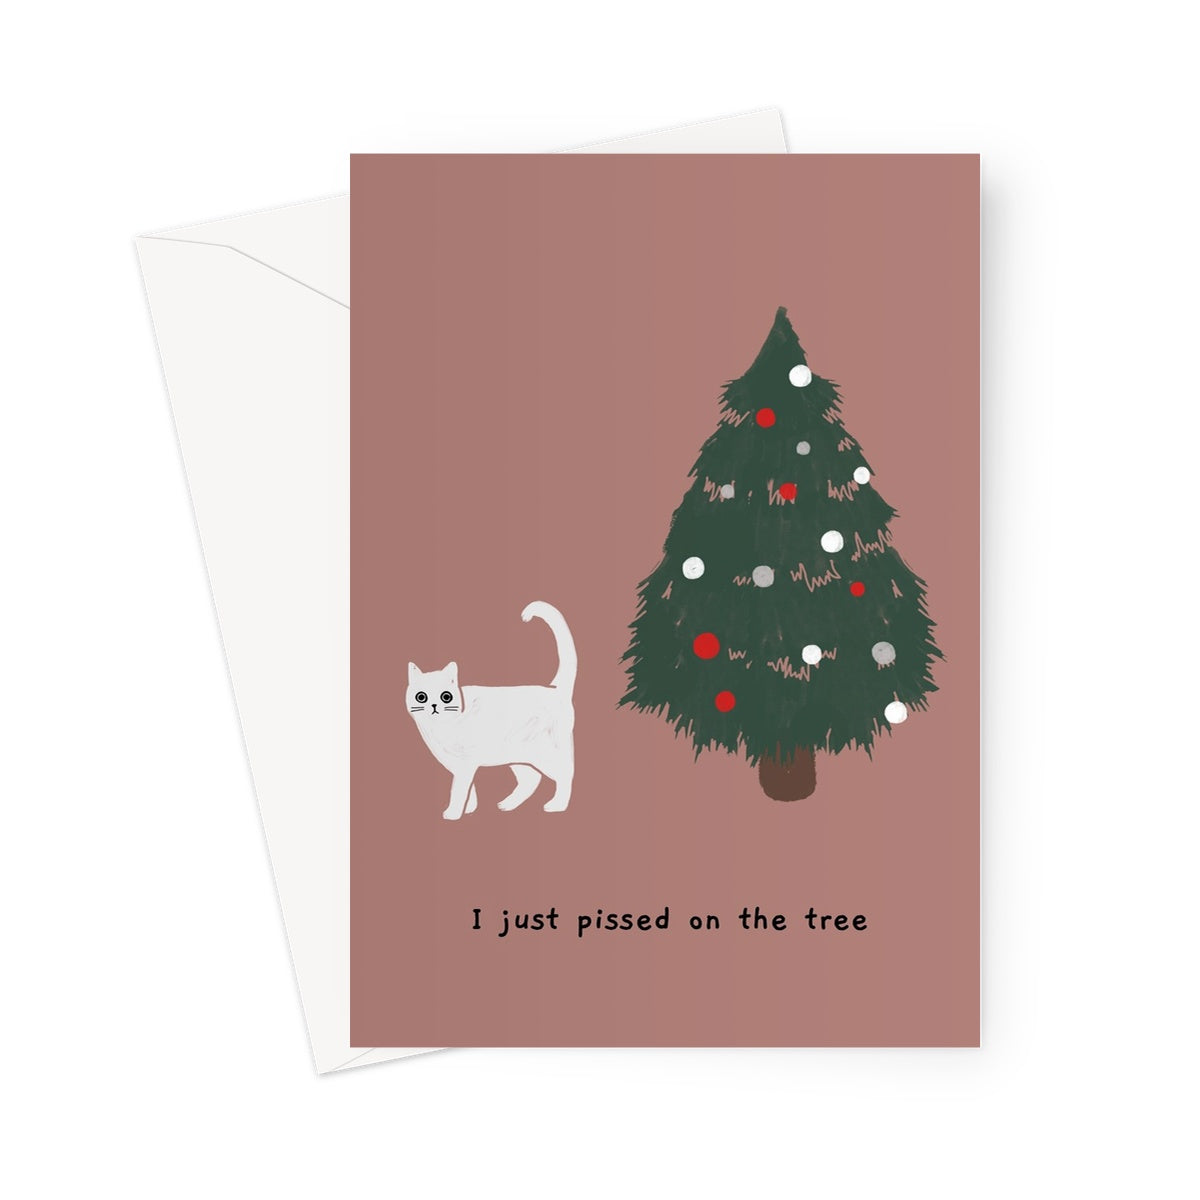 Ken the Cat Red 5x7" Christmas Card - I just pissed on the tree, Ken walking away from tree